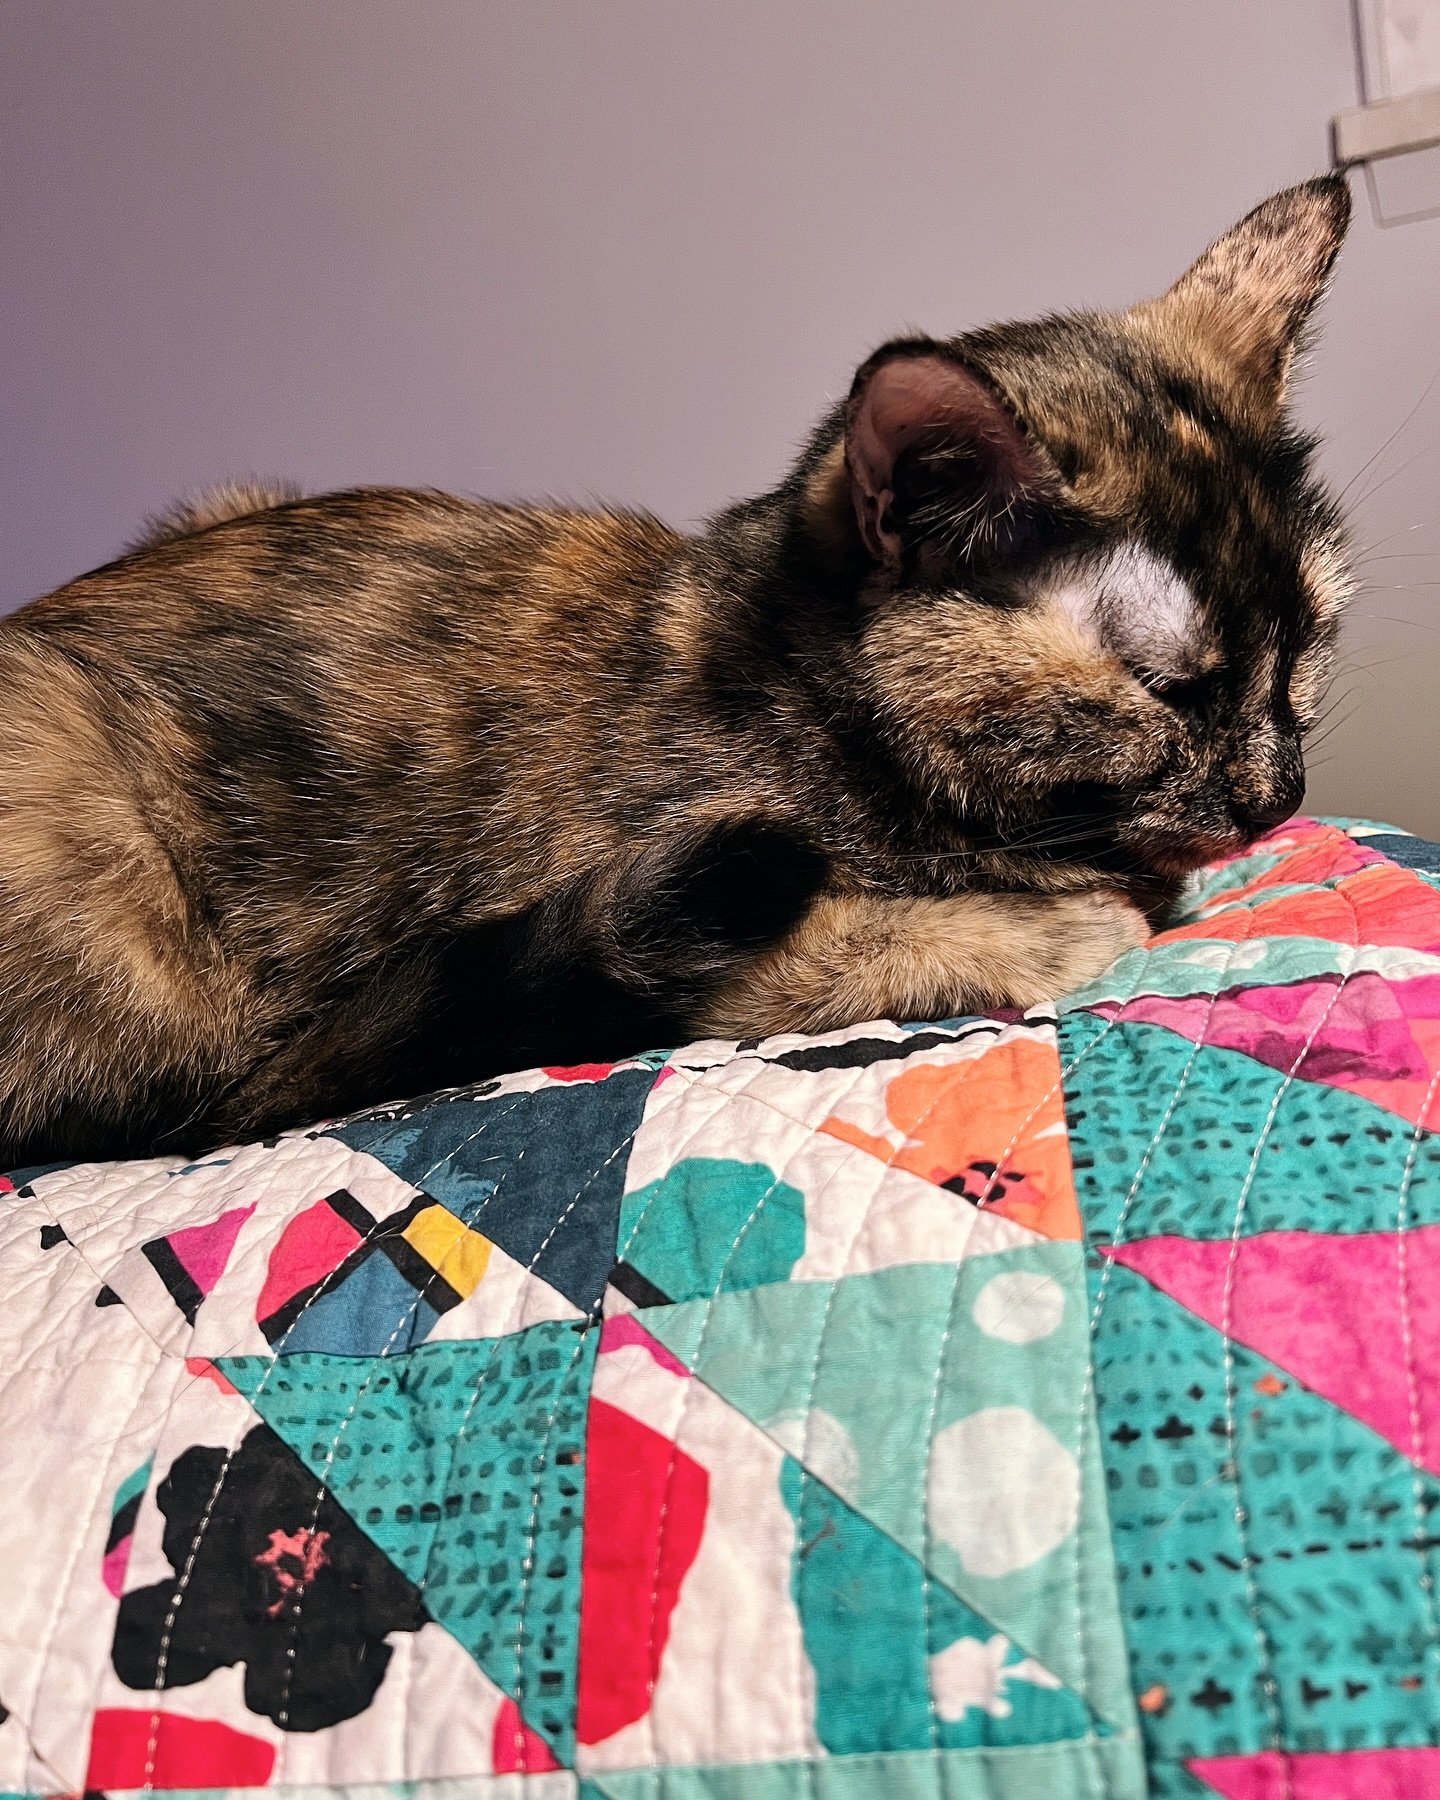 Quality control. ✅

#catsoninstagram #catsonquilts #catslovequilts #quiltersofinstagram #tortiesofinstagram